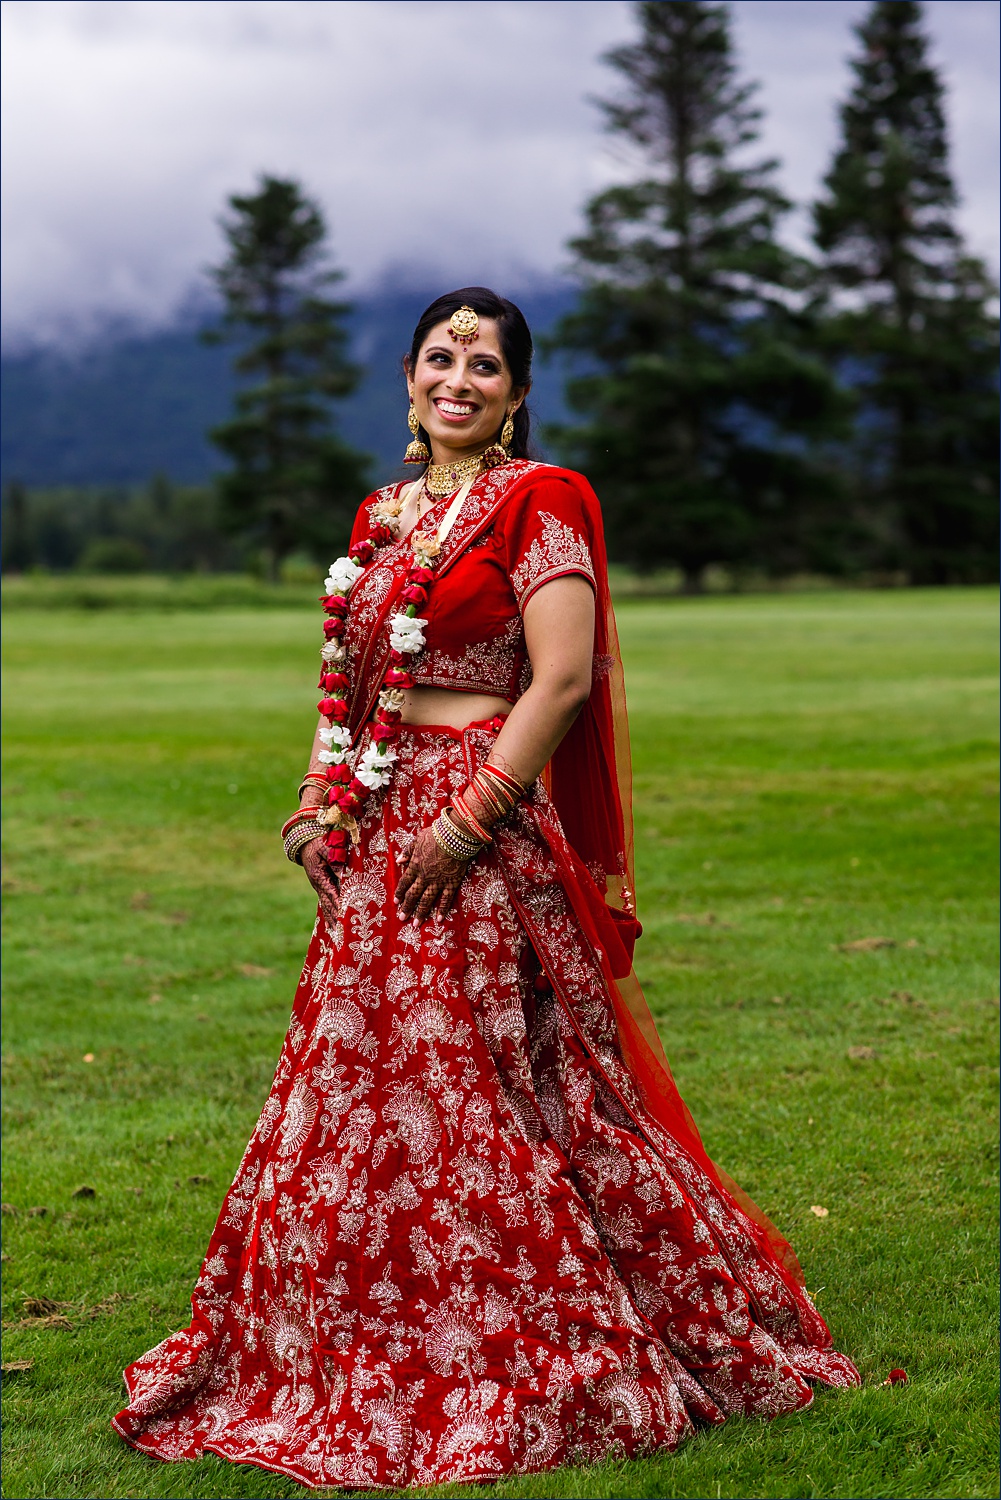 The bride in her wedding day saree for her Hindu wedding in New Hampshire